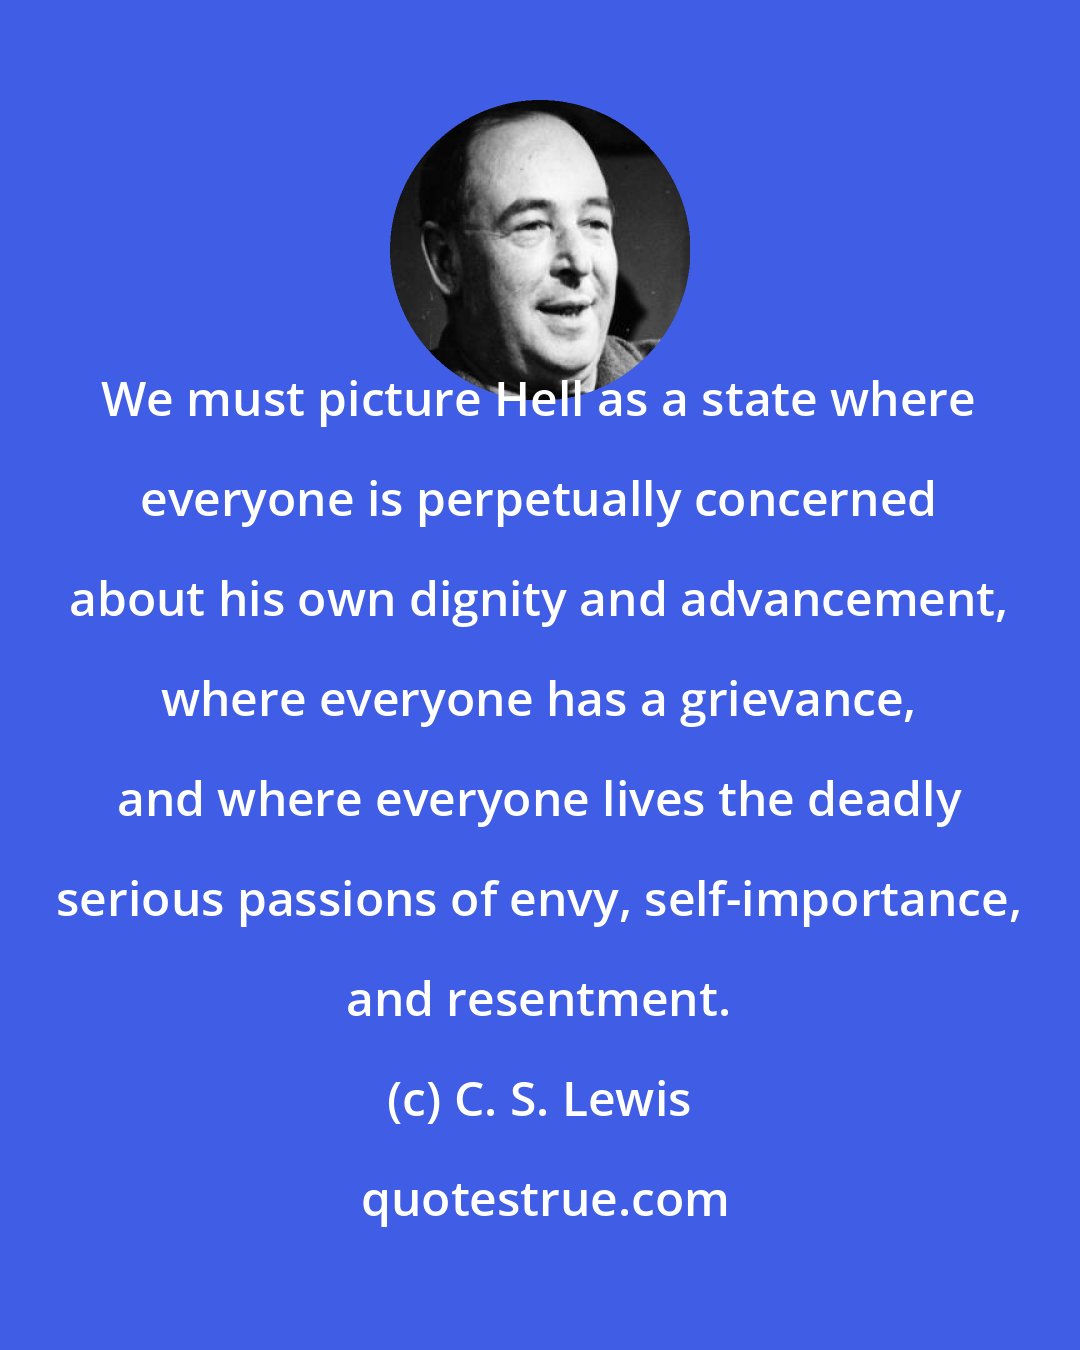 C. S. Lewis: We must picture Hell as a state where everyone is perpetually concerned about his own dignity and advancement, where everyone has a grievance, and where everyone lives the deadly serious passions of envy, self-importance, and resentment.